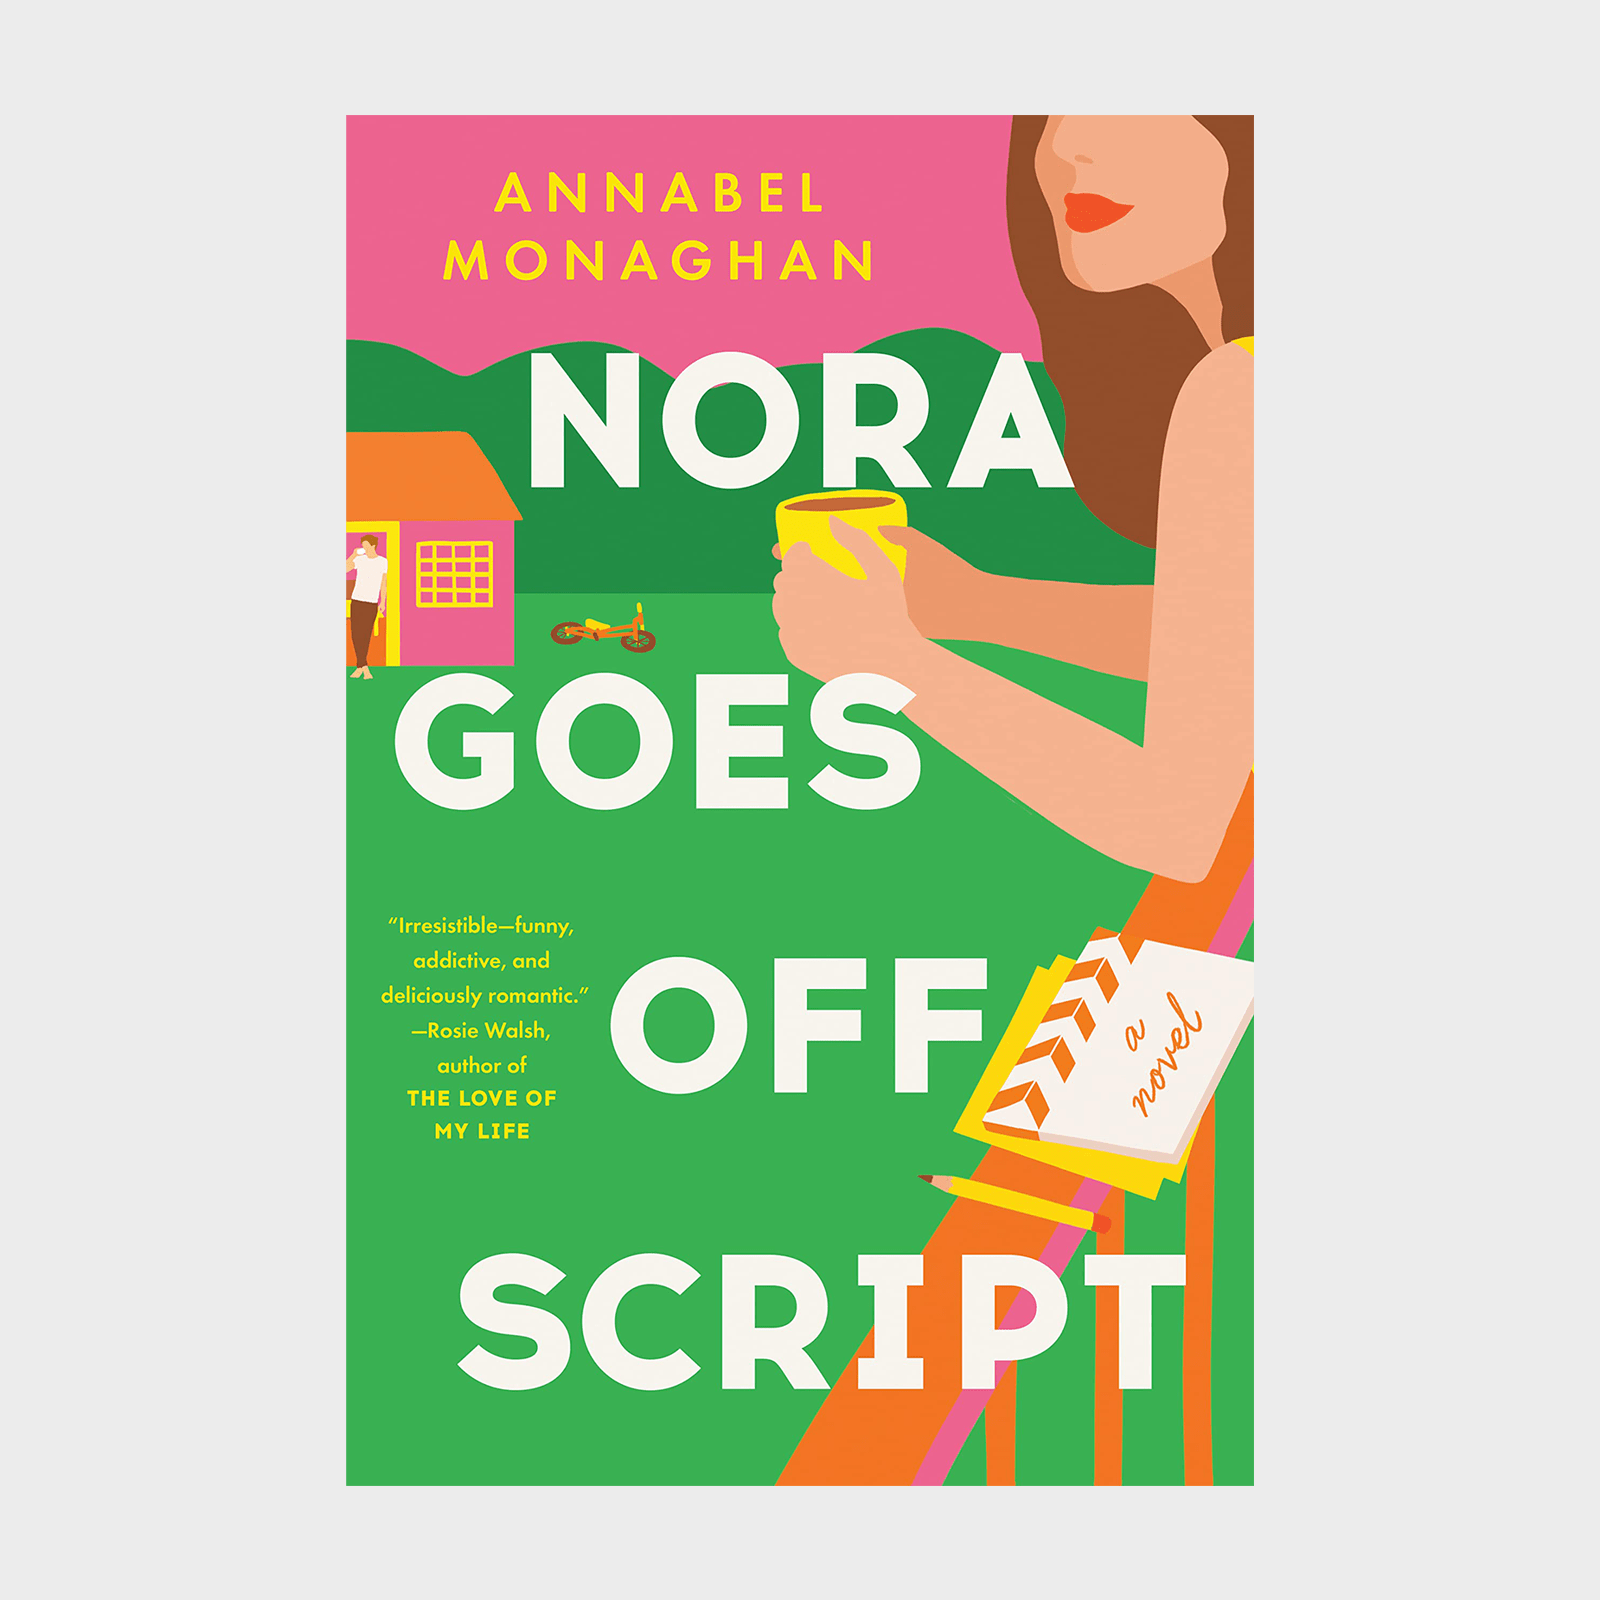 <p><strong>Release date: </strong>June 7, 2022</p> <p>Meet Nora Hamilton, the brains behind the latest romance channel hits and the protagonist of <em><a href="https://www.amazon.com/Nora-Goes-Script-Annabel-Monaghan/dp/0593420039/" rel="noopener noreferrer">Nora Goes Off Script</a></em>. After a heart-shattering breakup, she comes up with her most brilliant plot yet: a <a href="https://www.rd.com/list/romantic-movies/" rel="noreferrer noopener noreferrer">romantic movie</a> that spotlights her ex's selfishness. But life goes off-script when her little screenplay gets picked up as a big-screen blockbuster. Suddenly, Nora must learn to navigate Hollywood—and the sexy celebrities she encounters along the way.</p> <p class="listicle-page__cta-button-shop"><a class="shop-btn" href="https://www.amazon.com/Nora-Goes-Script-Annabel-Monaghan/dp/0593420039/">Shop Now</a></p>